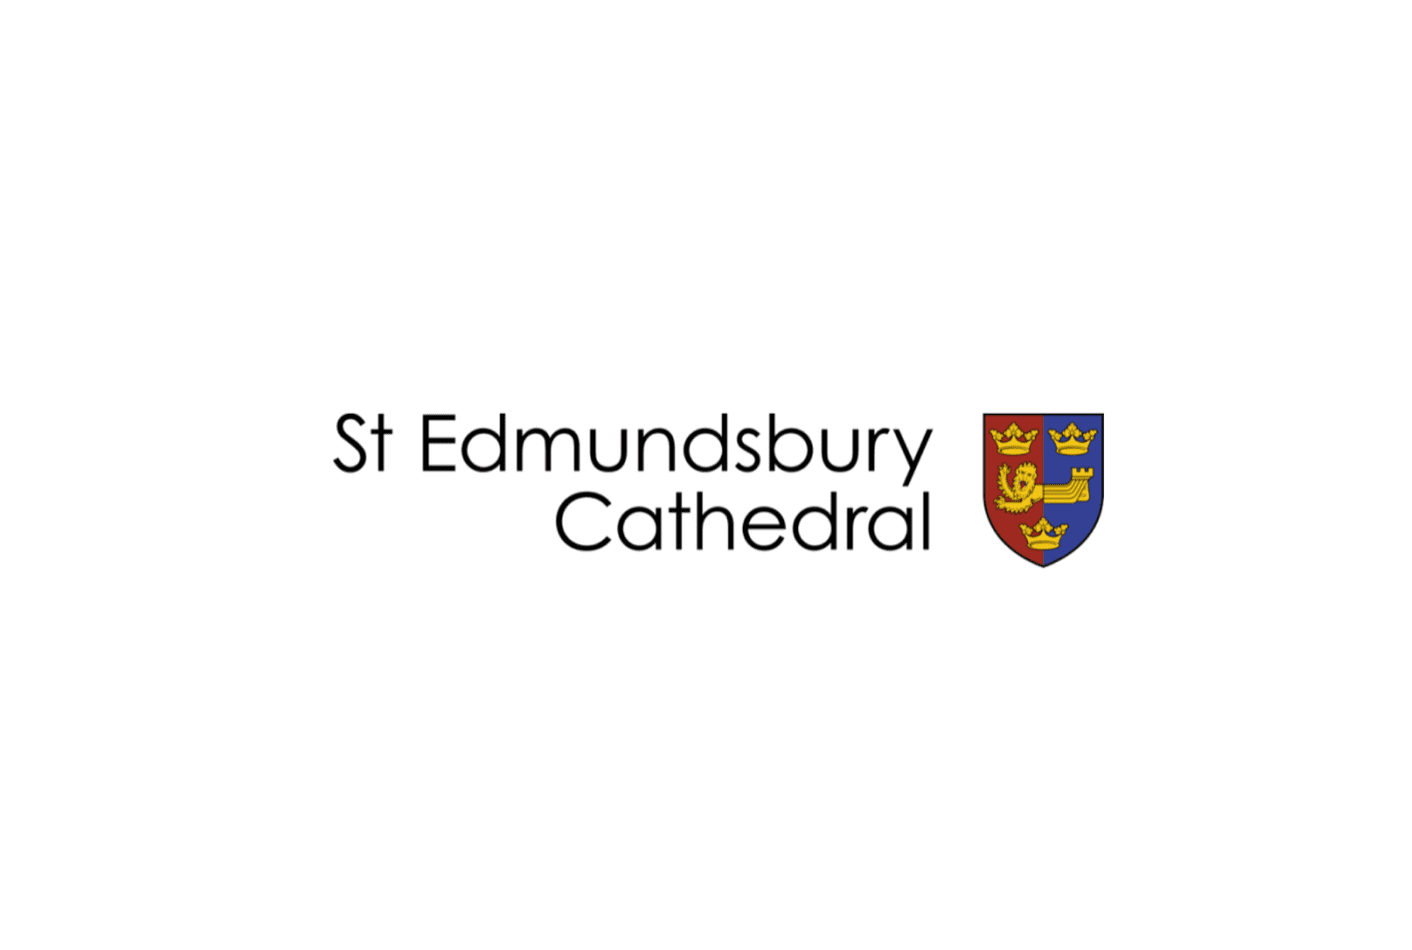 Holocaust Memorial Day to be marked at St Edmundsbury Cathedral